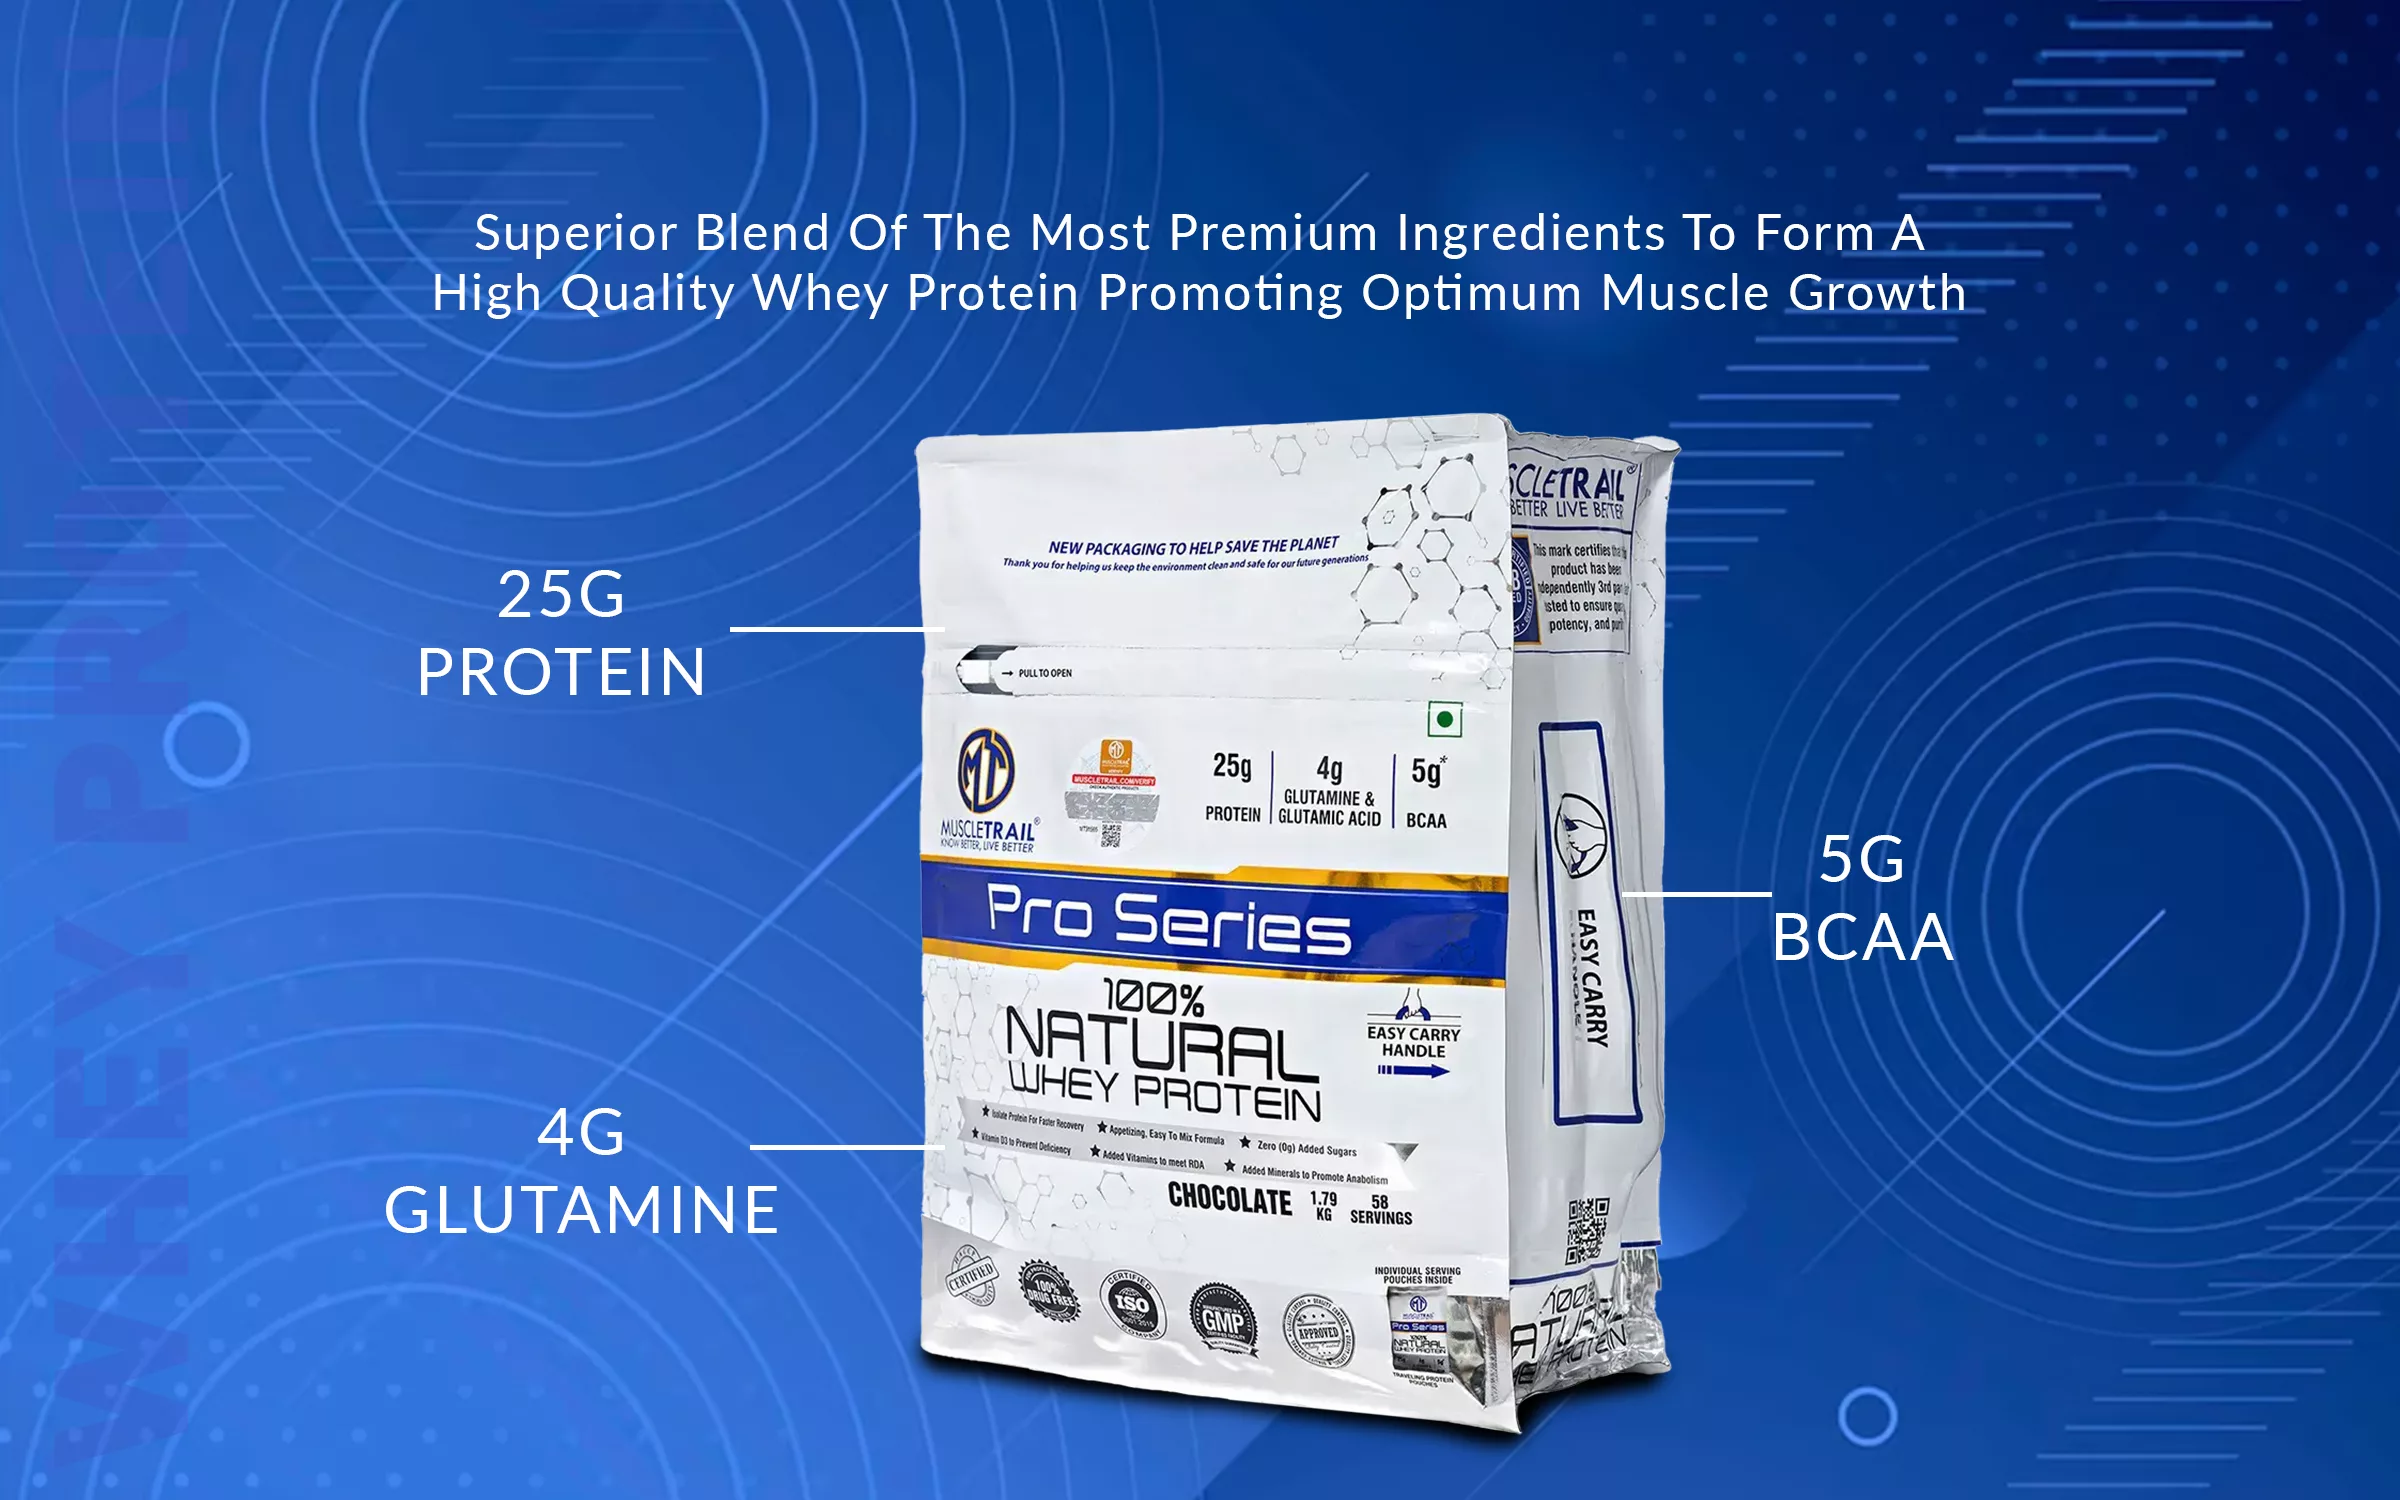 Nutritional properties of Whey protein